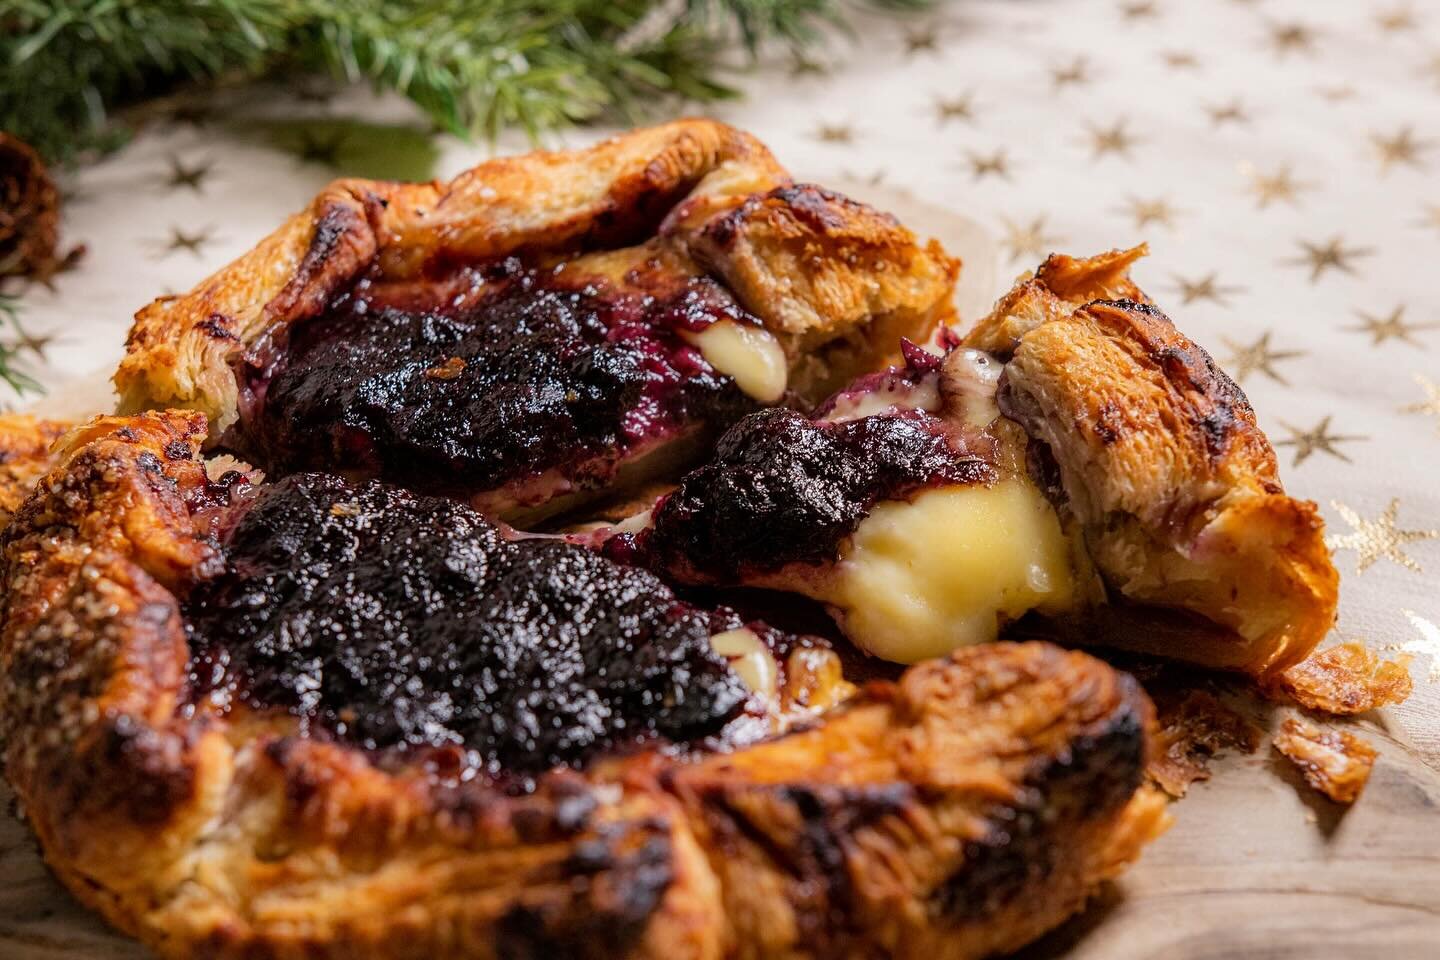 Blueberry &amp; Brie Galette with locally grown blueberry jam and Camenbrie cheese from @blueledgefarm, wrapped in our flaky pie dough. A great, easy holiday appetizer, just pop it in the oven before serving. Order today on the website, or over the p